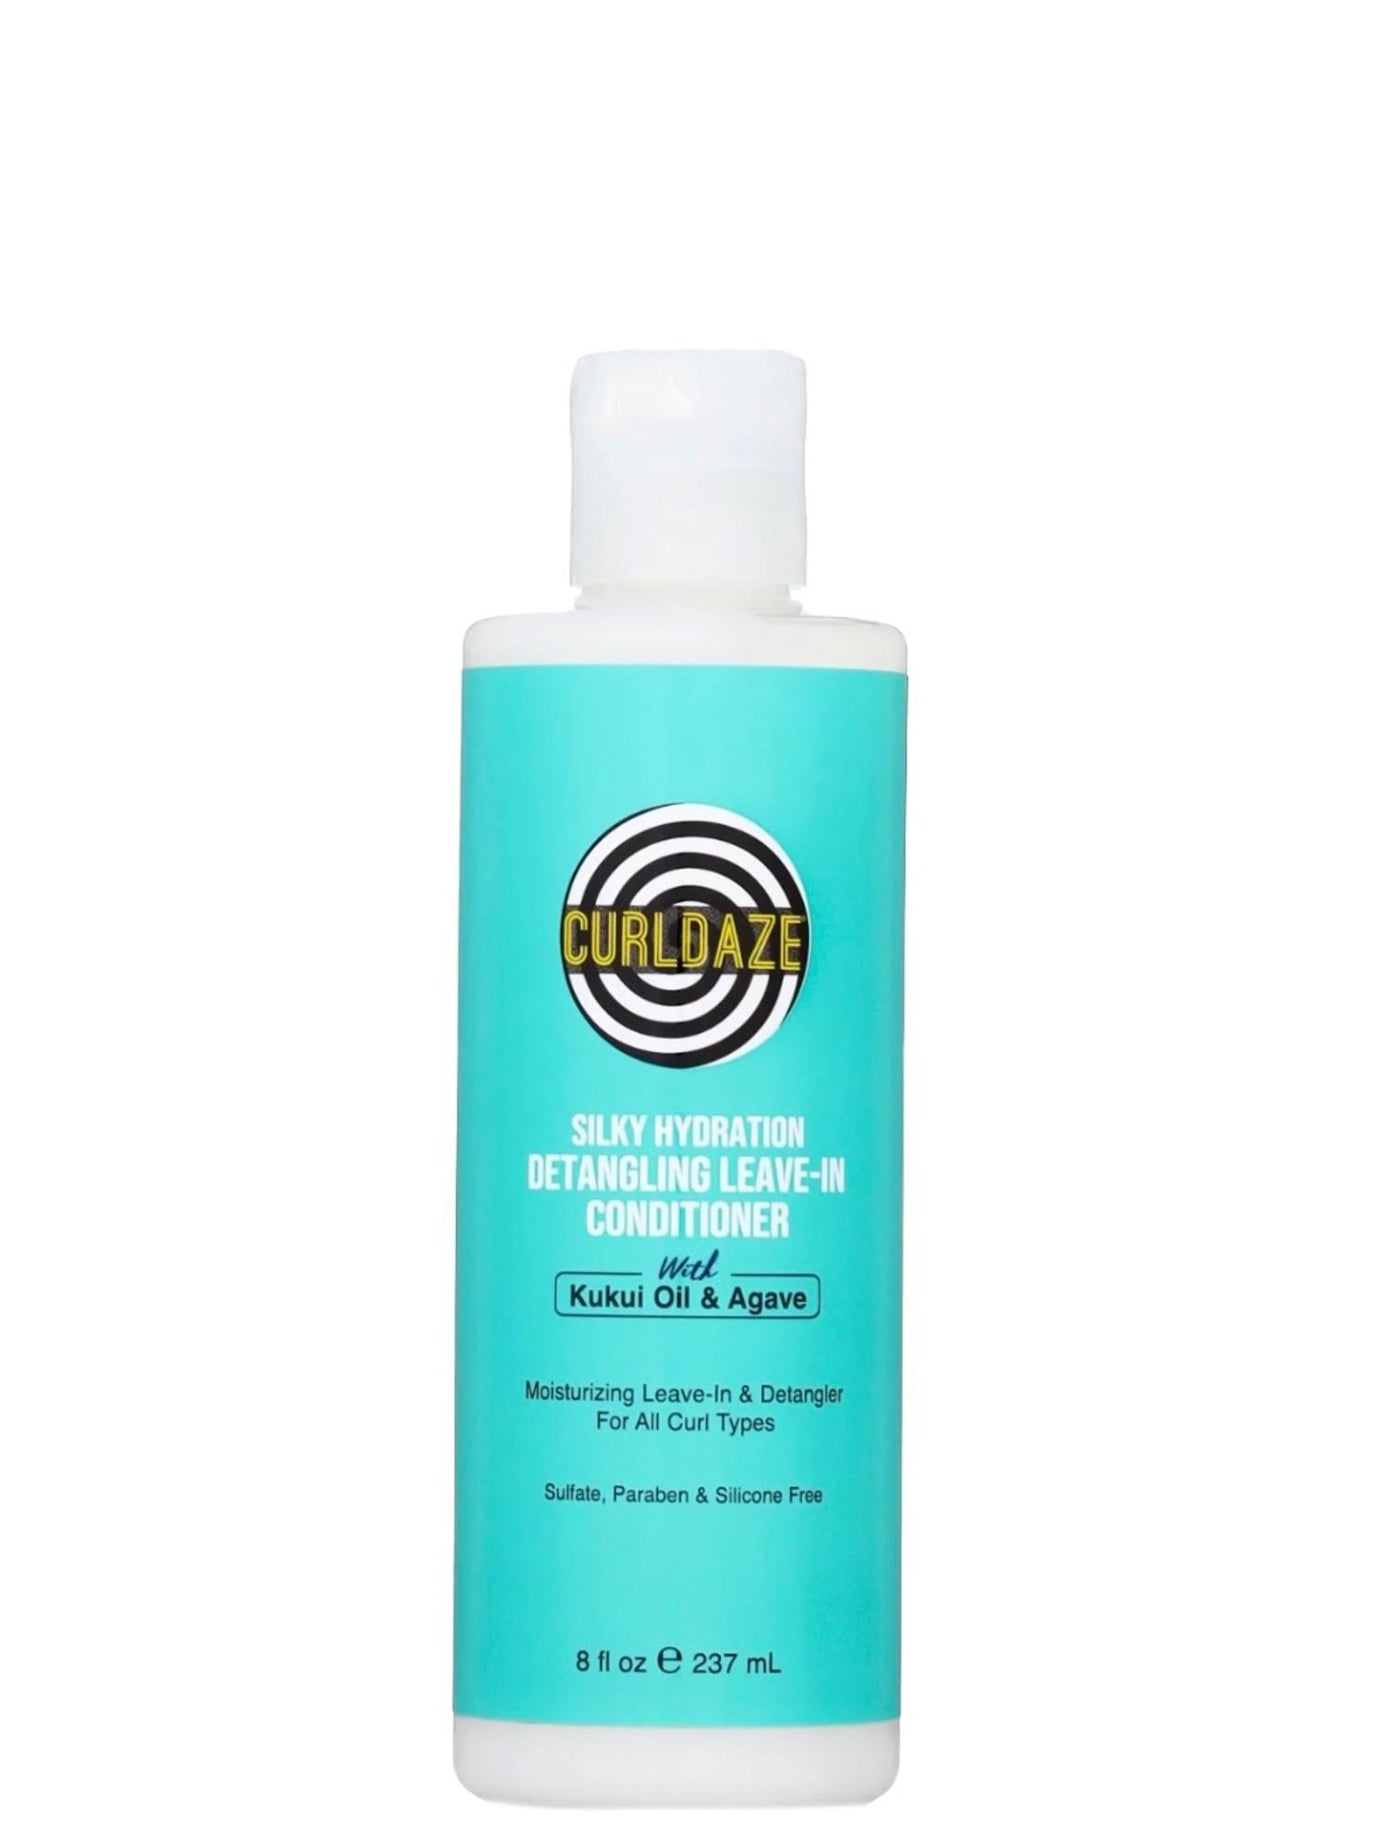 CurlDaze Silky Hydration Detangling Leave-In Conditioner with Kukui Oil and Agave (8 oz)